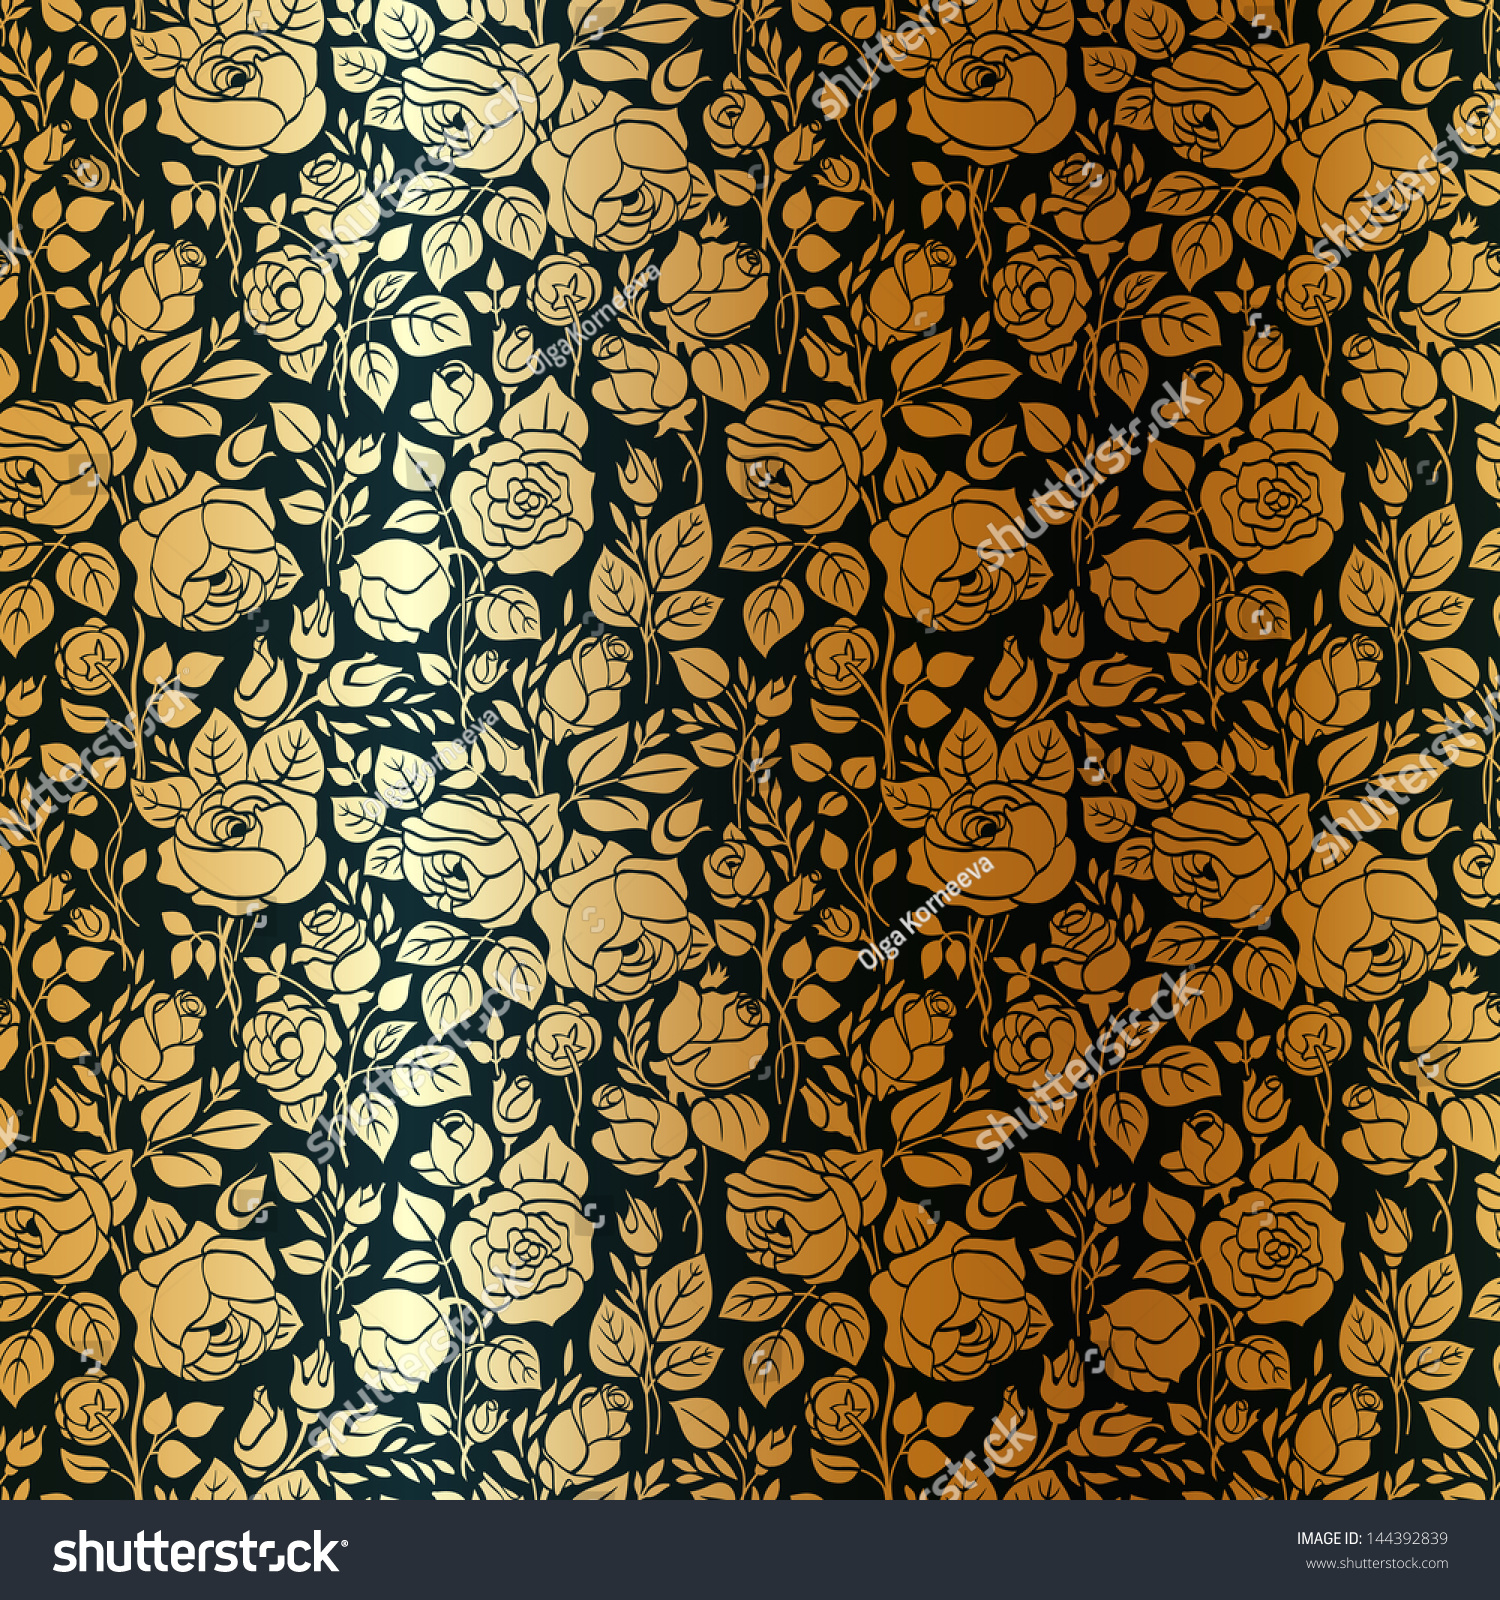 SVG of Gold vintage seamless pattern with garden roses svg